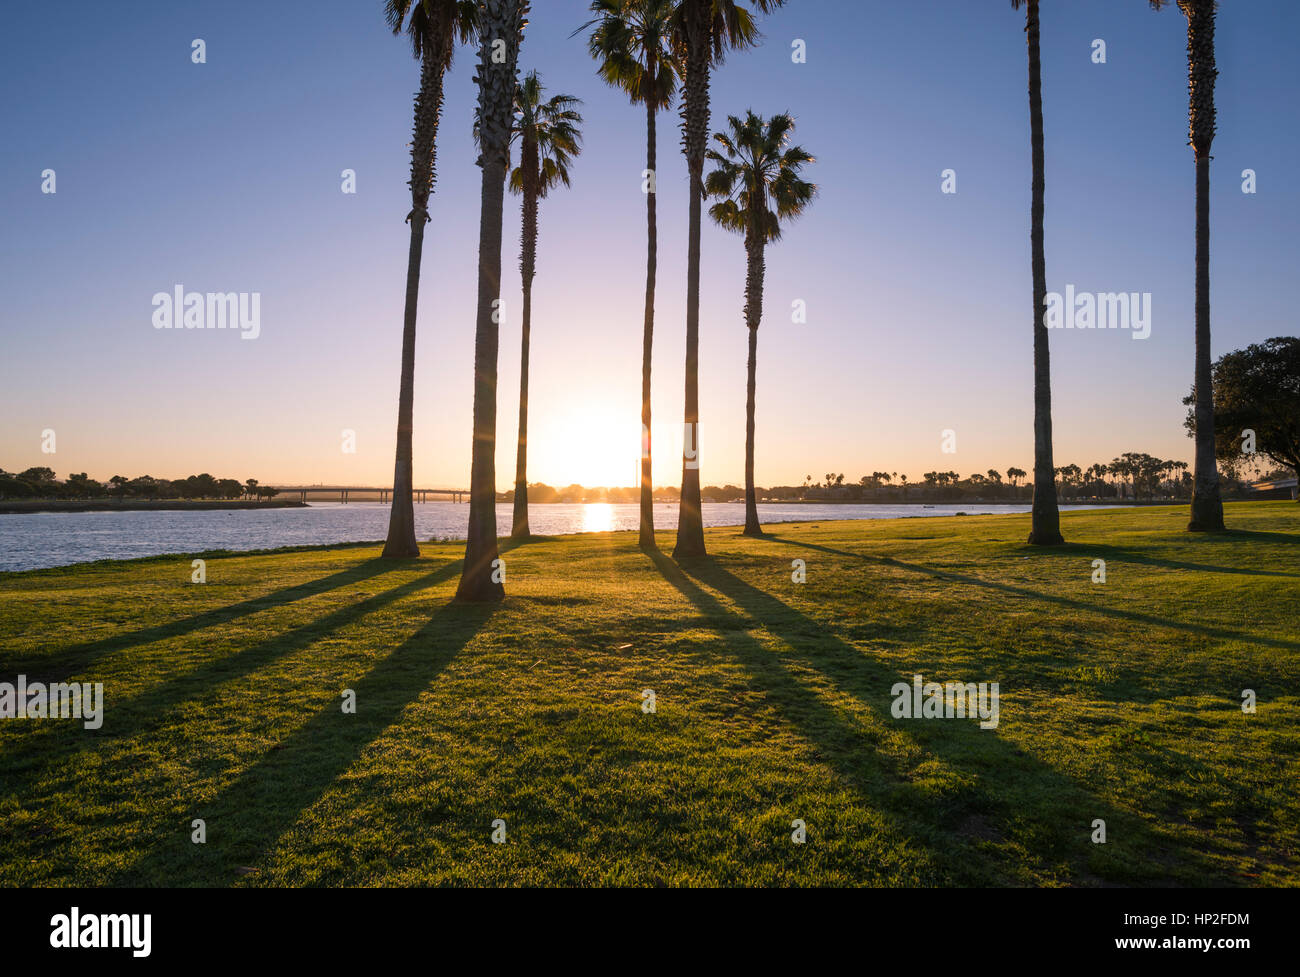 Goup of palm trees in the early morning at Mission Bay Park. San Diego, California, USA. Stock Photo